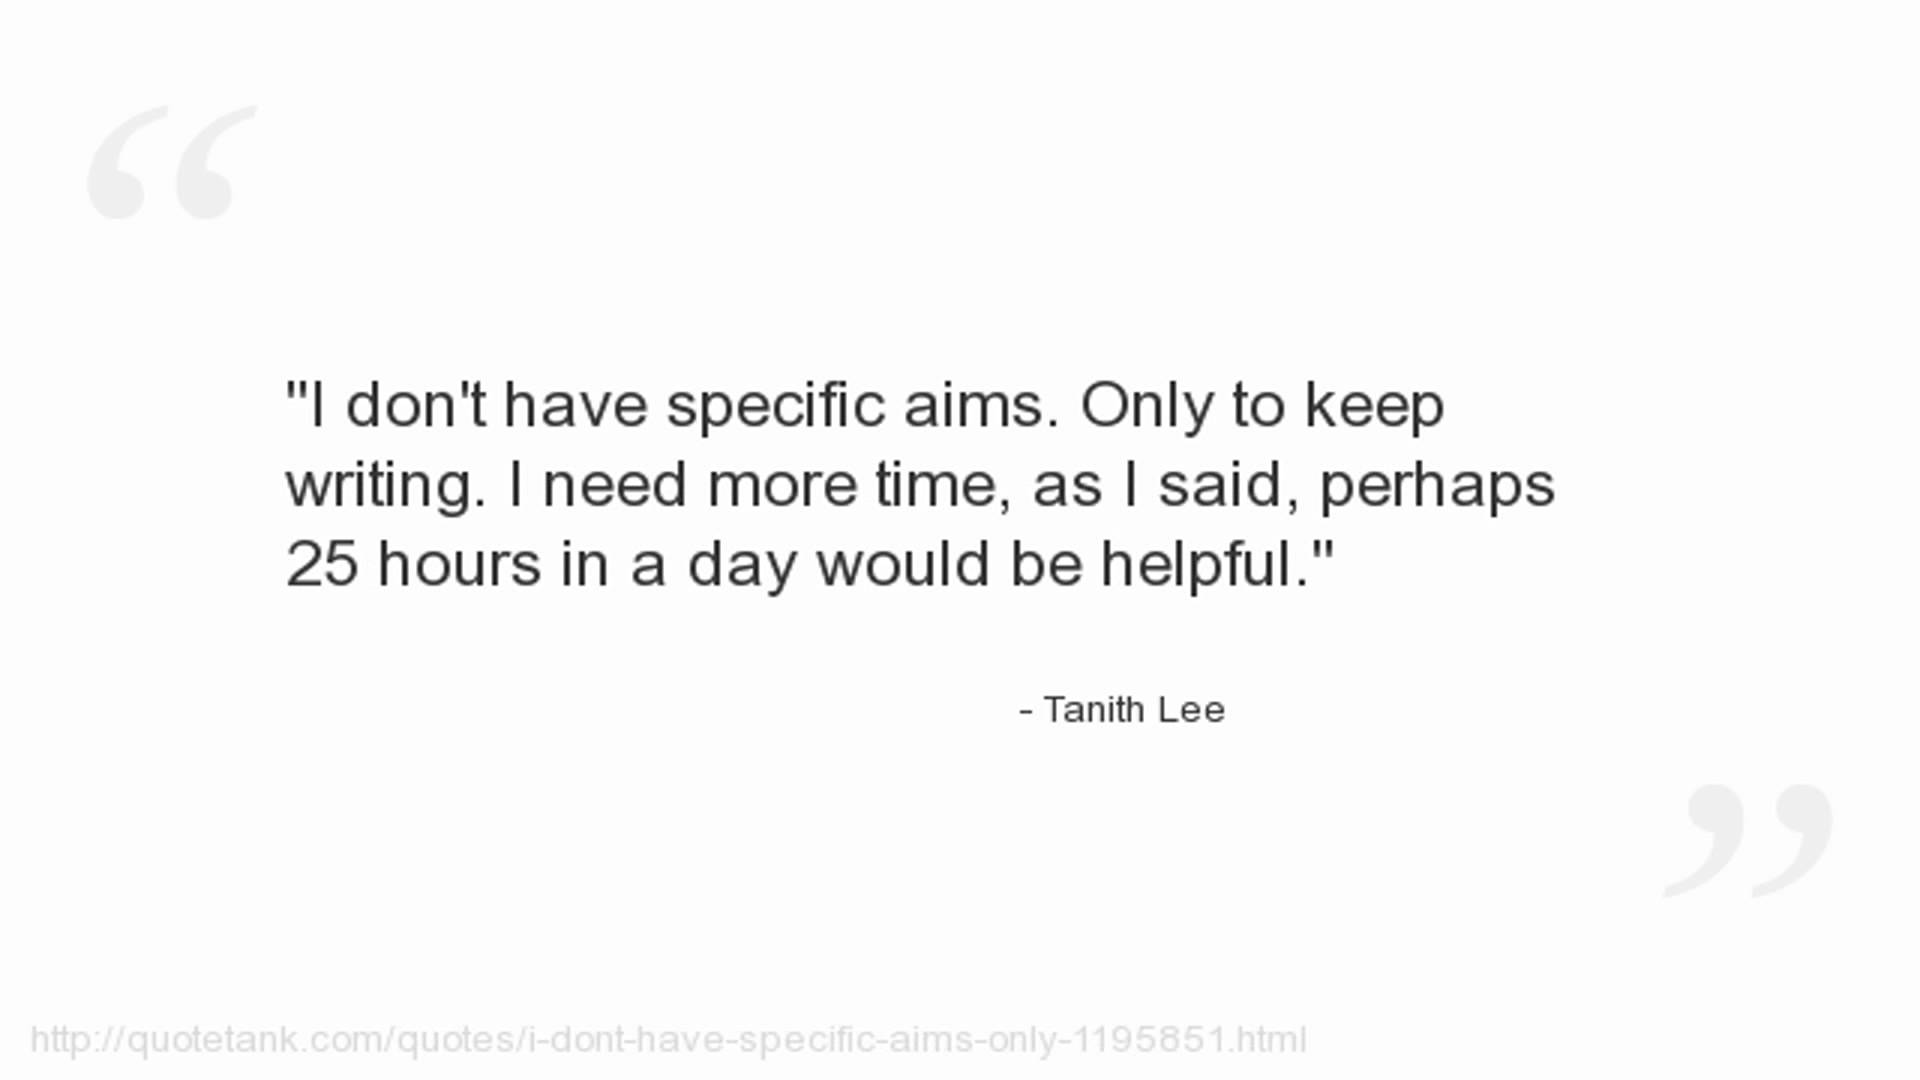 Tanith Lee's quote #6